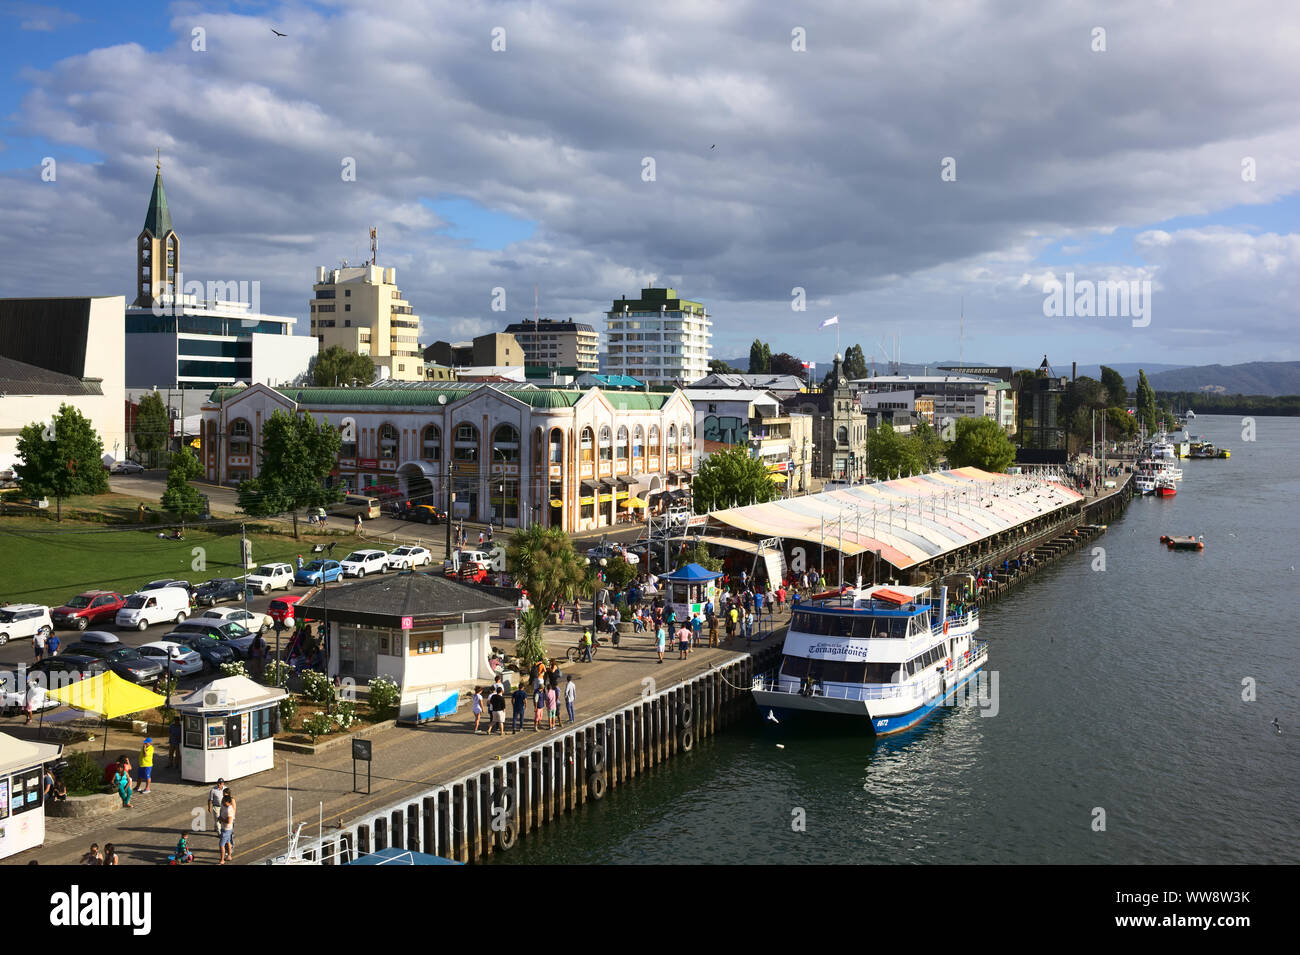 VALDIVIA, CHILE - FEBRUARY 3, 2016: View from Pedro de Valdivia bridge onto the riverside with the Feria Fluvial (Fish, fruit and vegetable market) Stock Photo